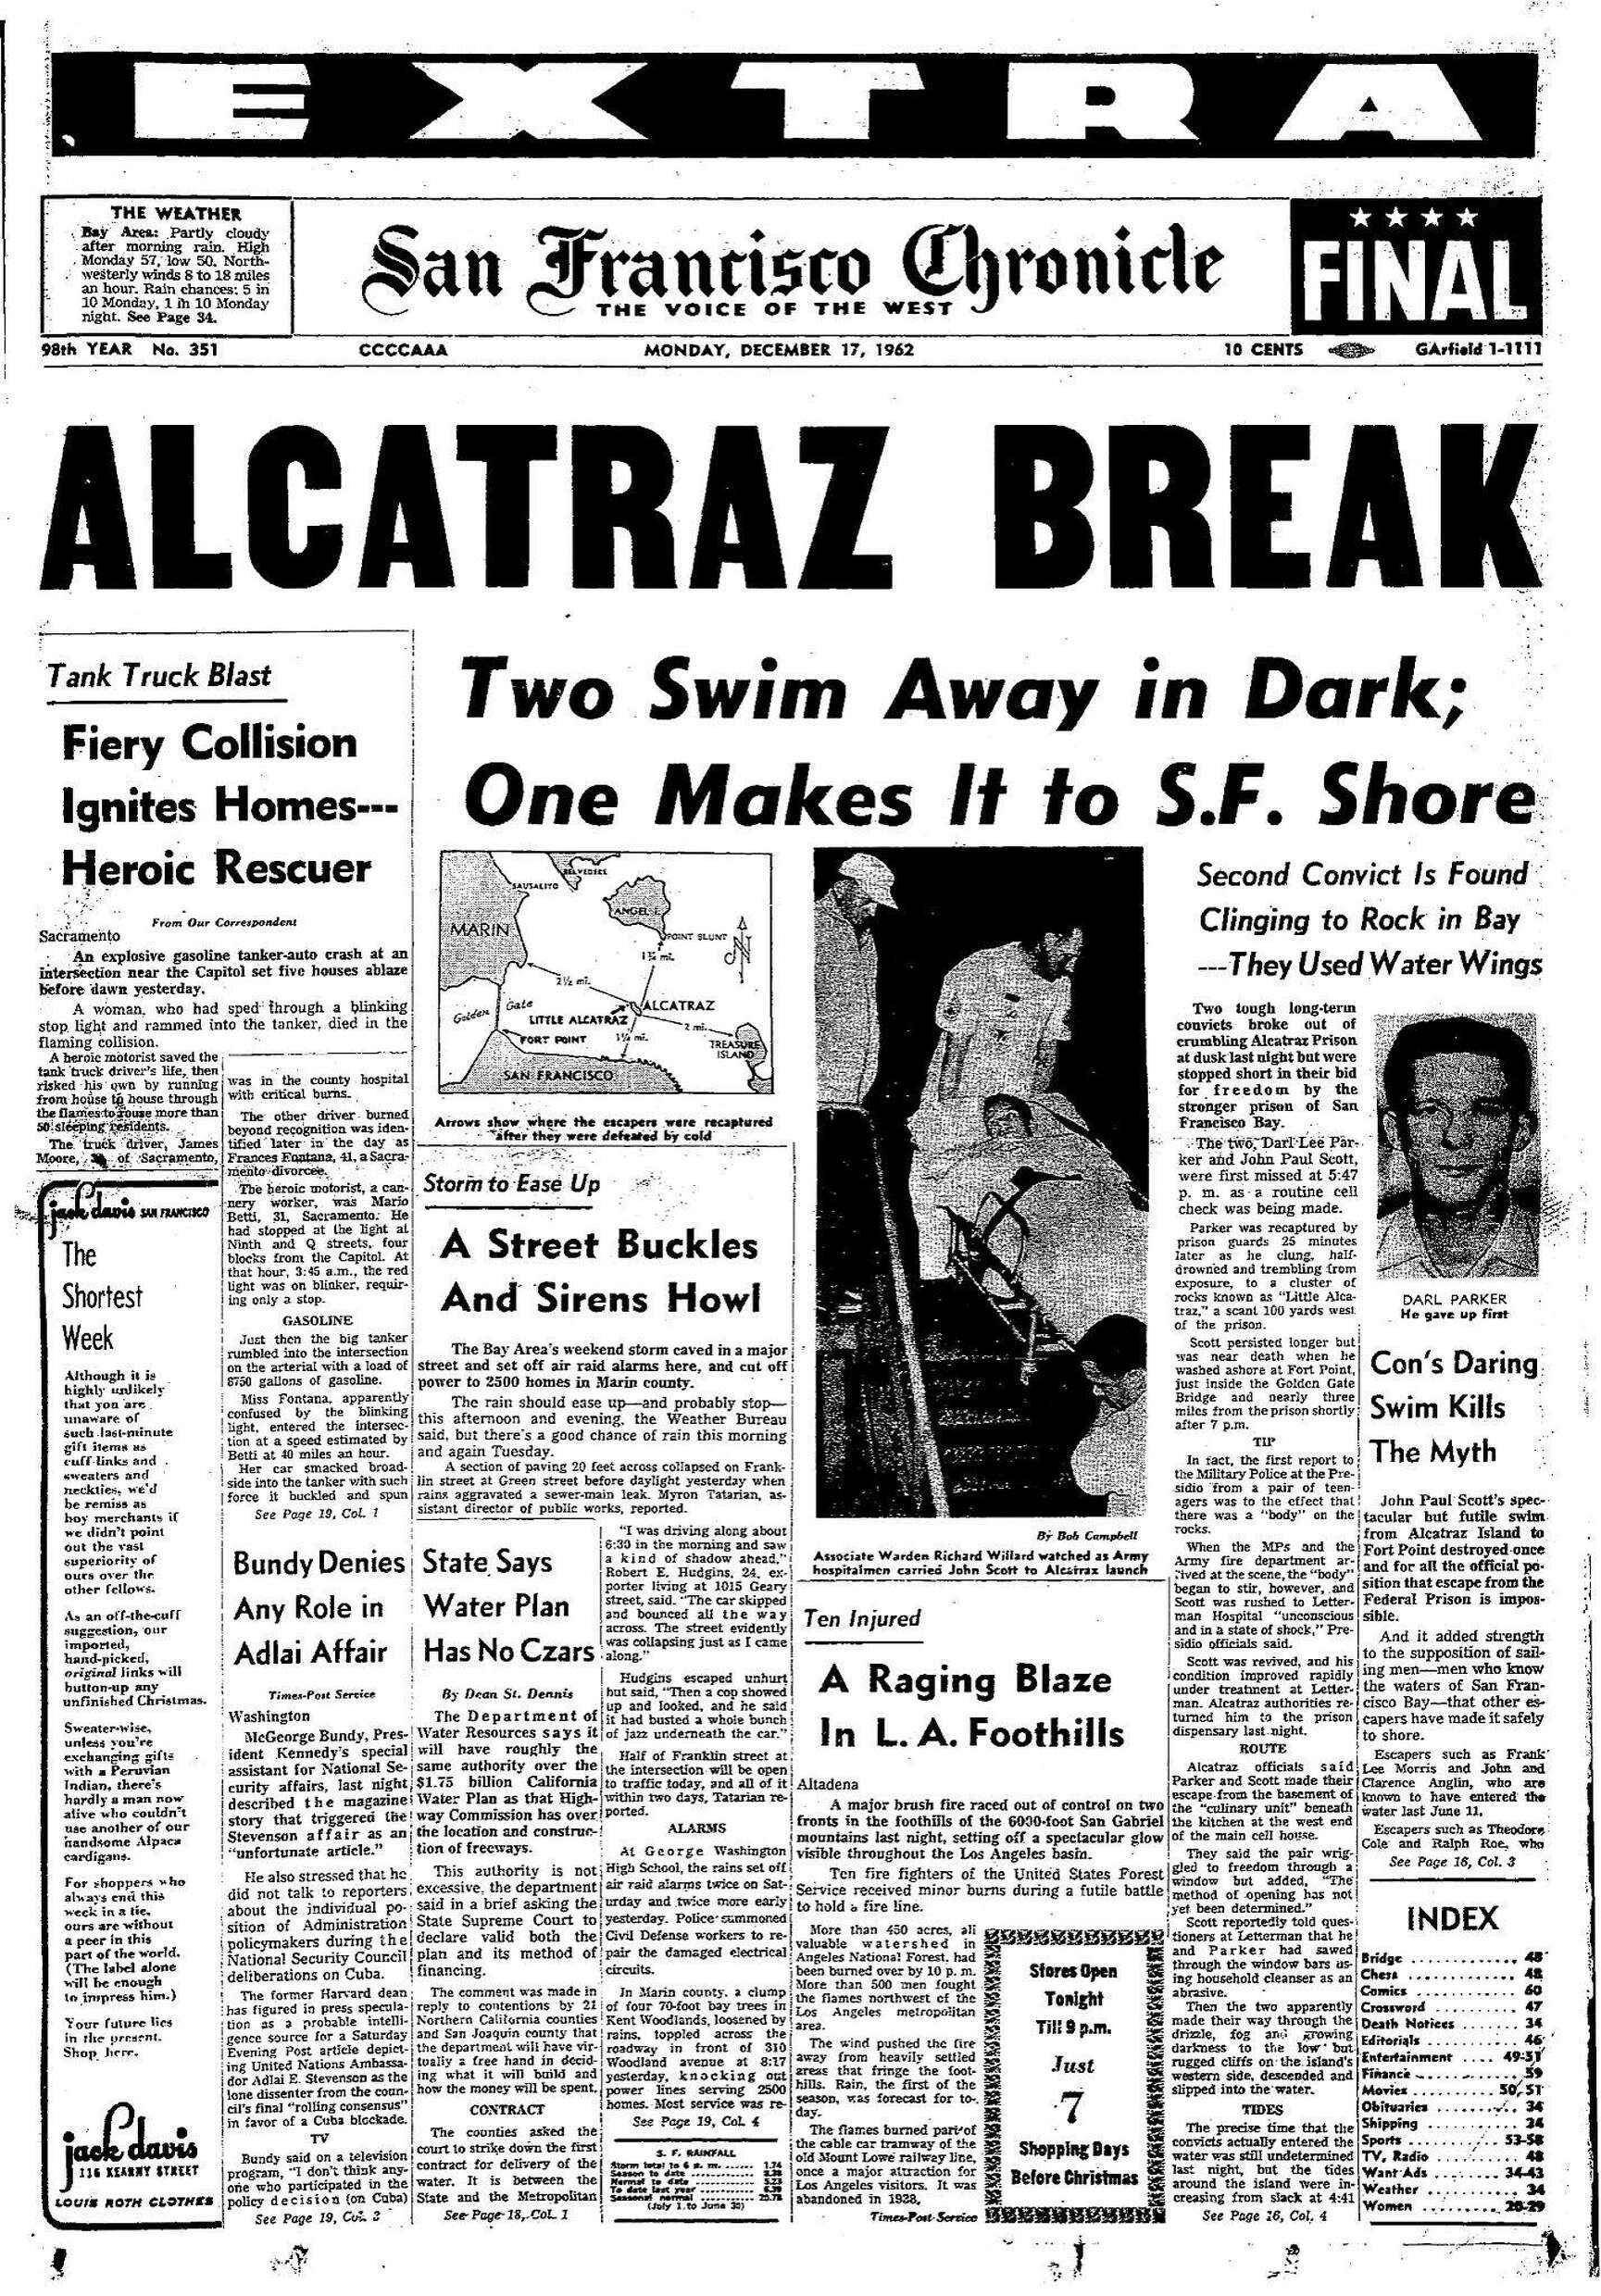 Chronicle Covers: The final escape from Alcatraz - SFChronicle.com1729 x 2480